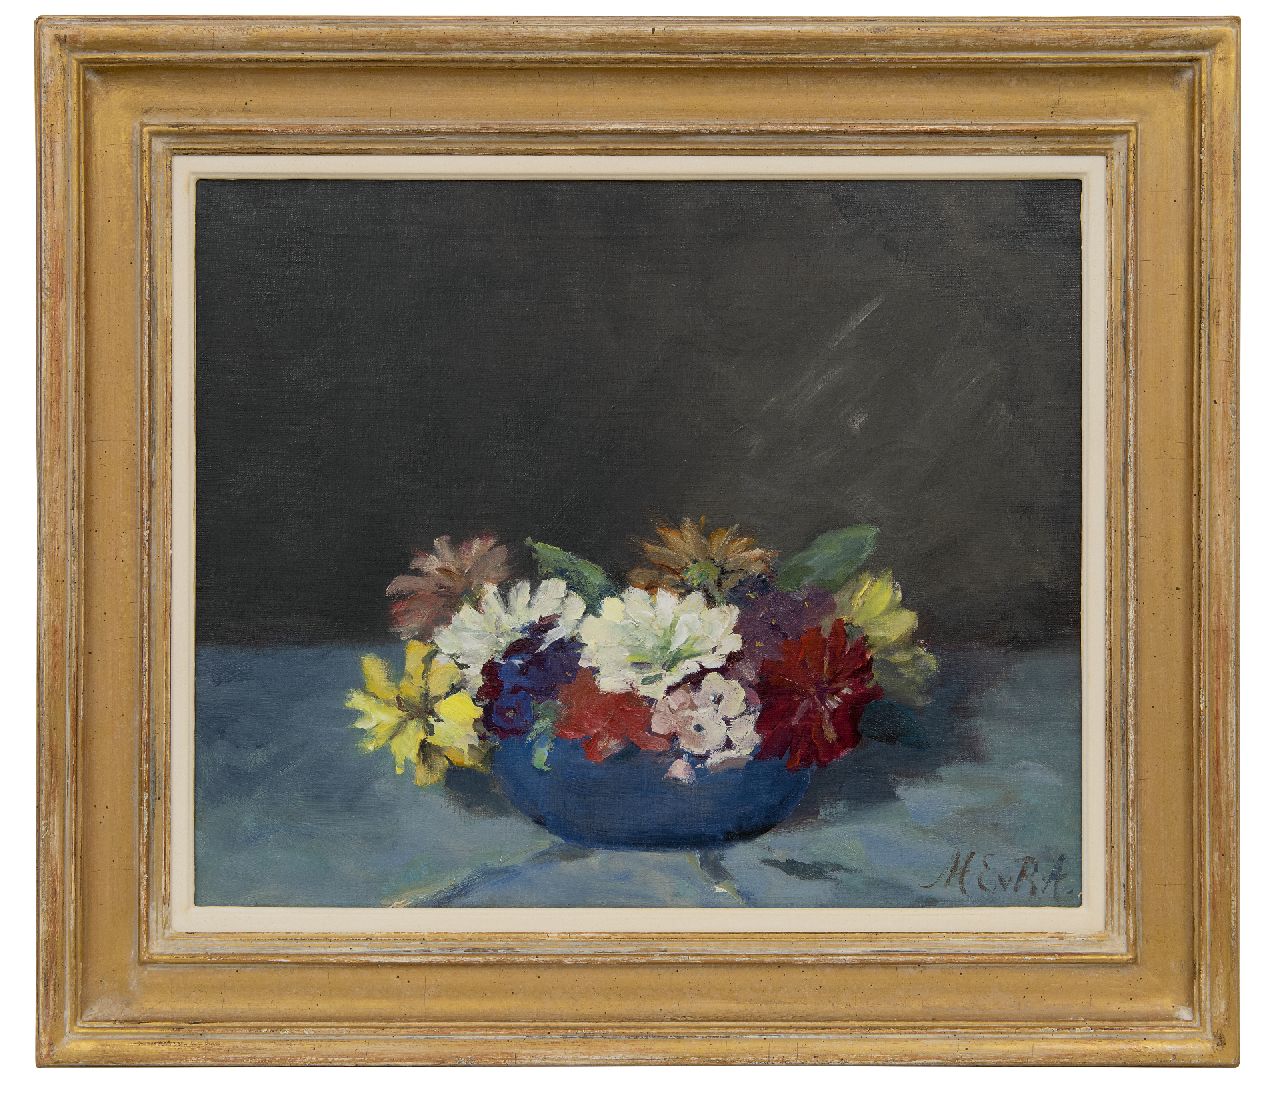 Regteren Altena M.E. van | 'Marie' Engelina van Regteren Altena | Paintings offered for sale | Zinnias, oil on canvas 39.2 x 48.3 cm, signed l.r. with initials